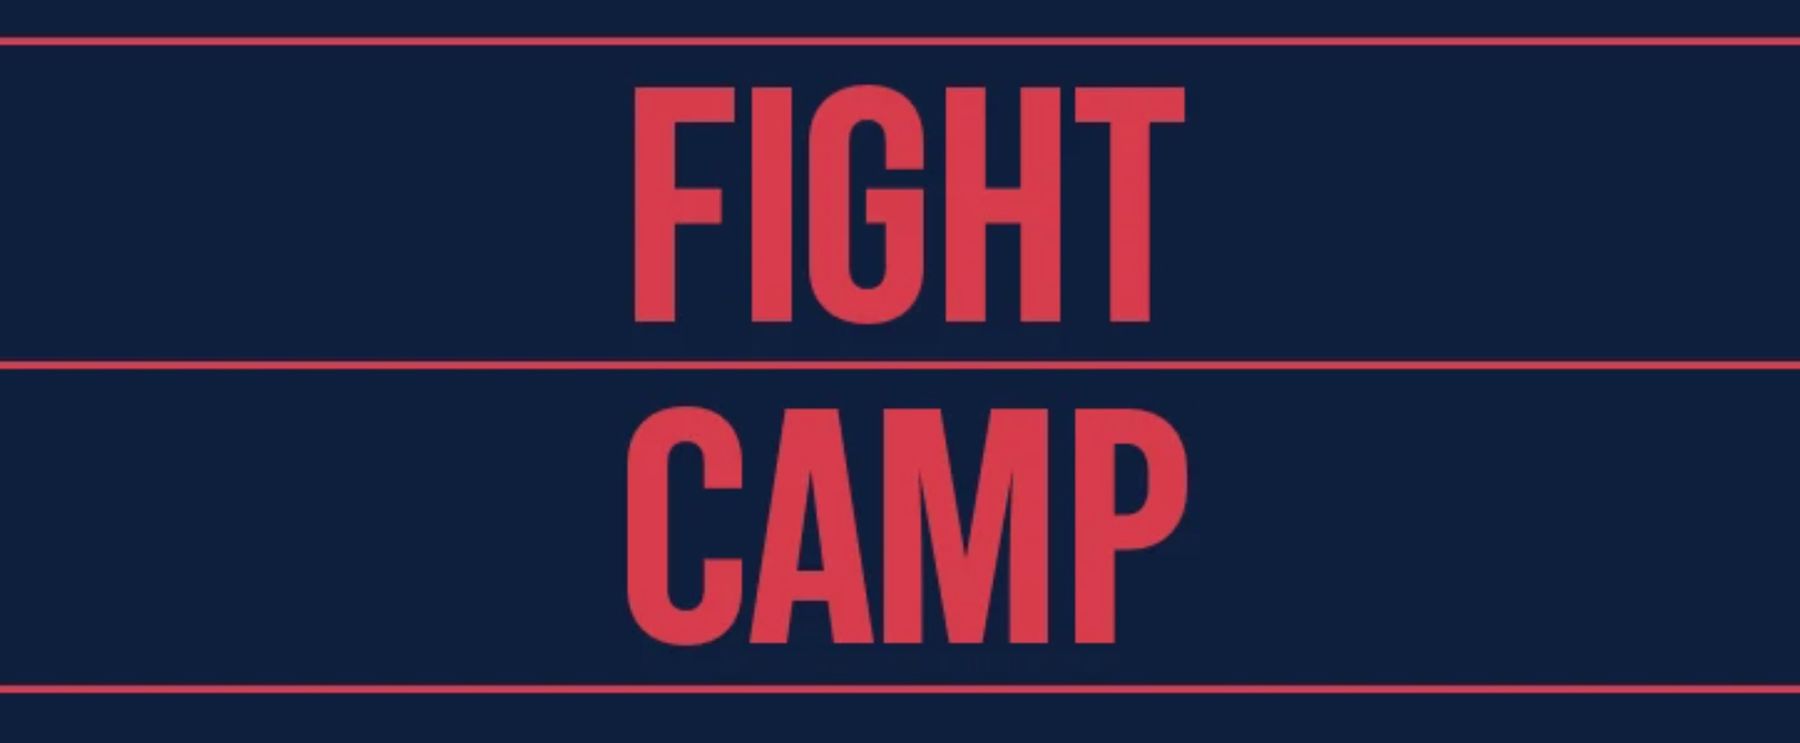 Welcome to the All-New FightCamp